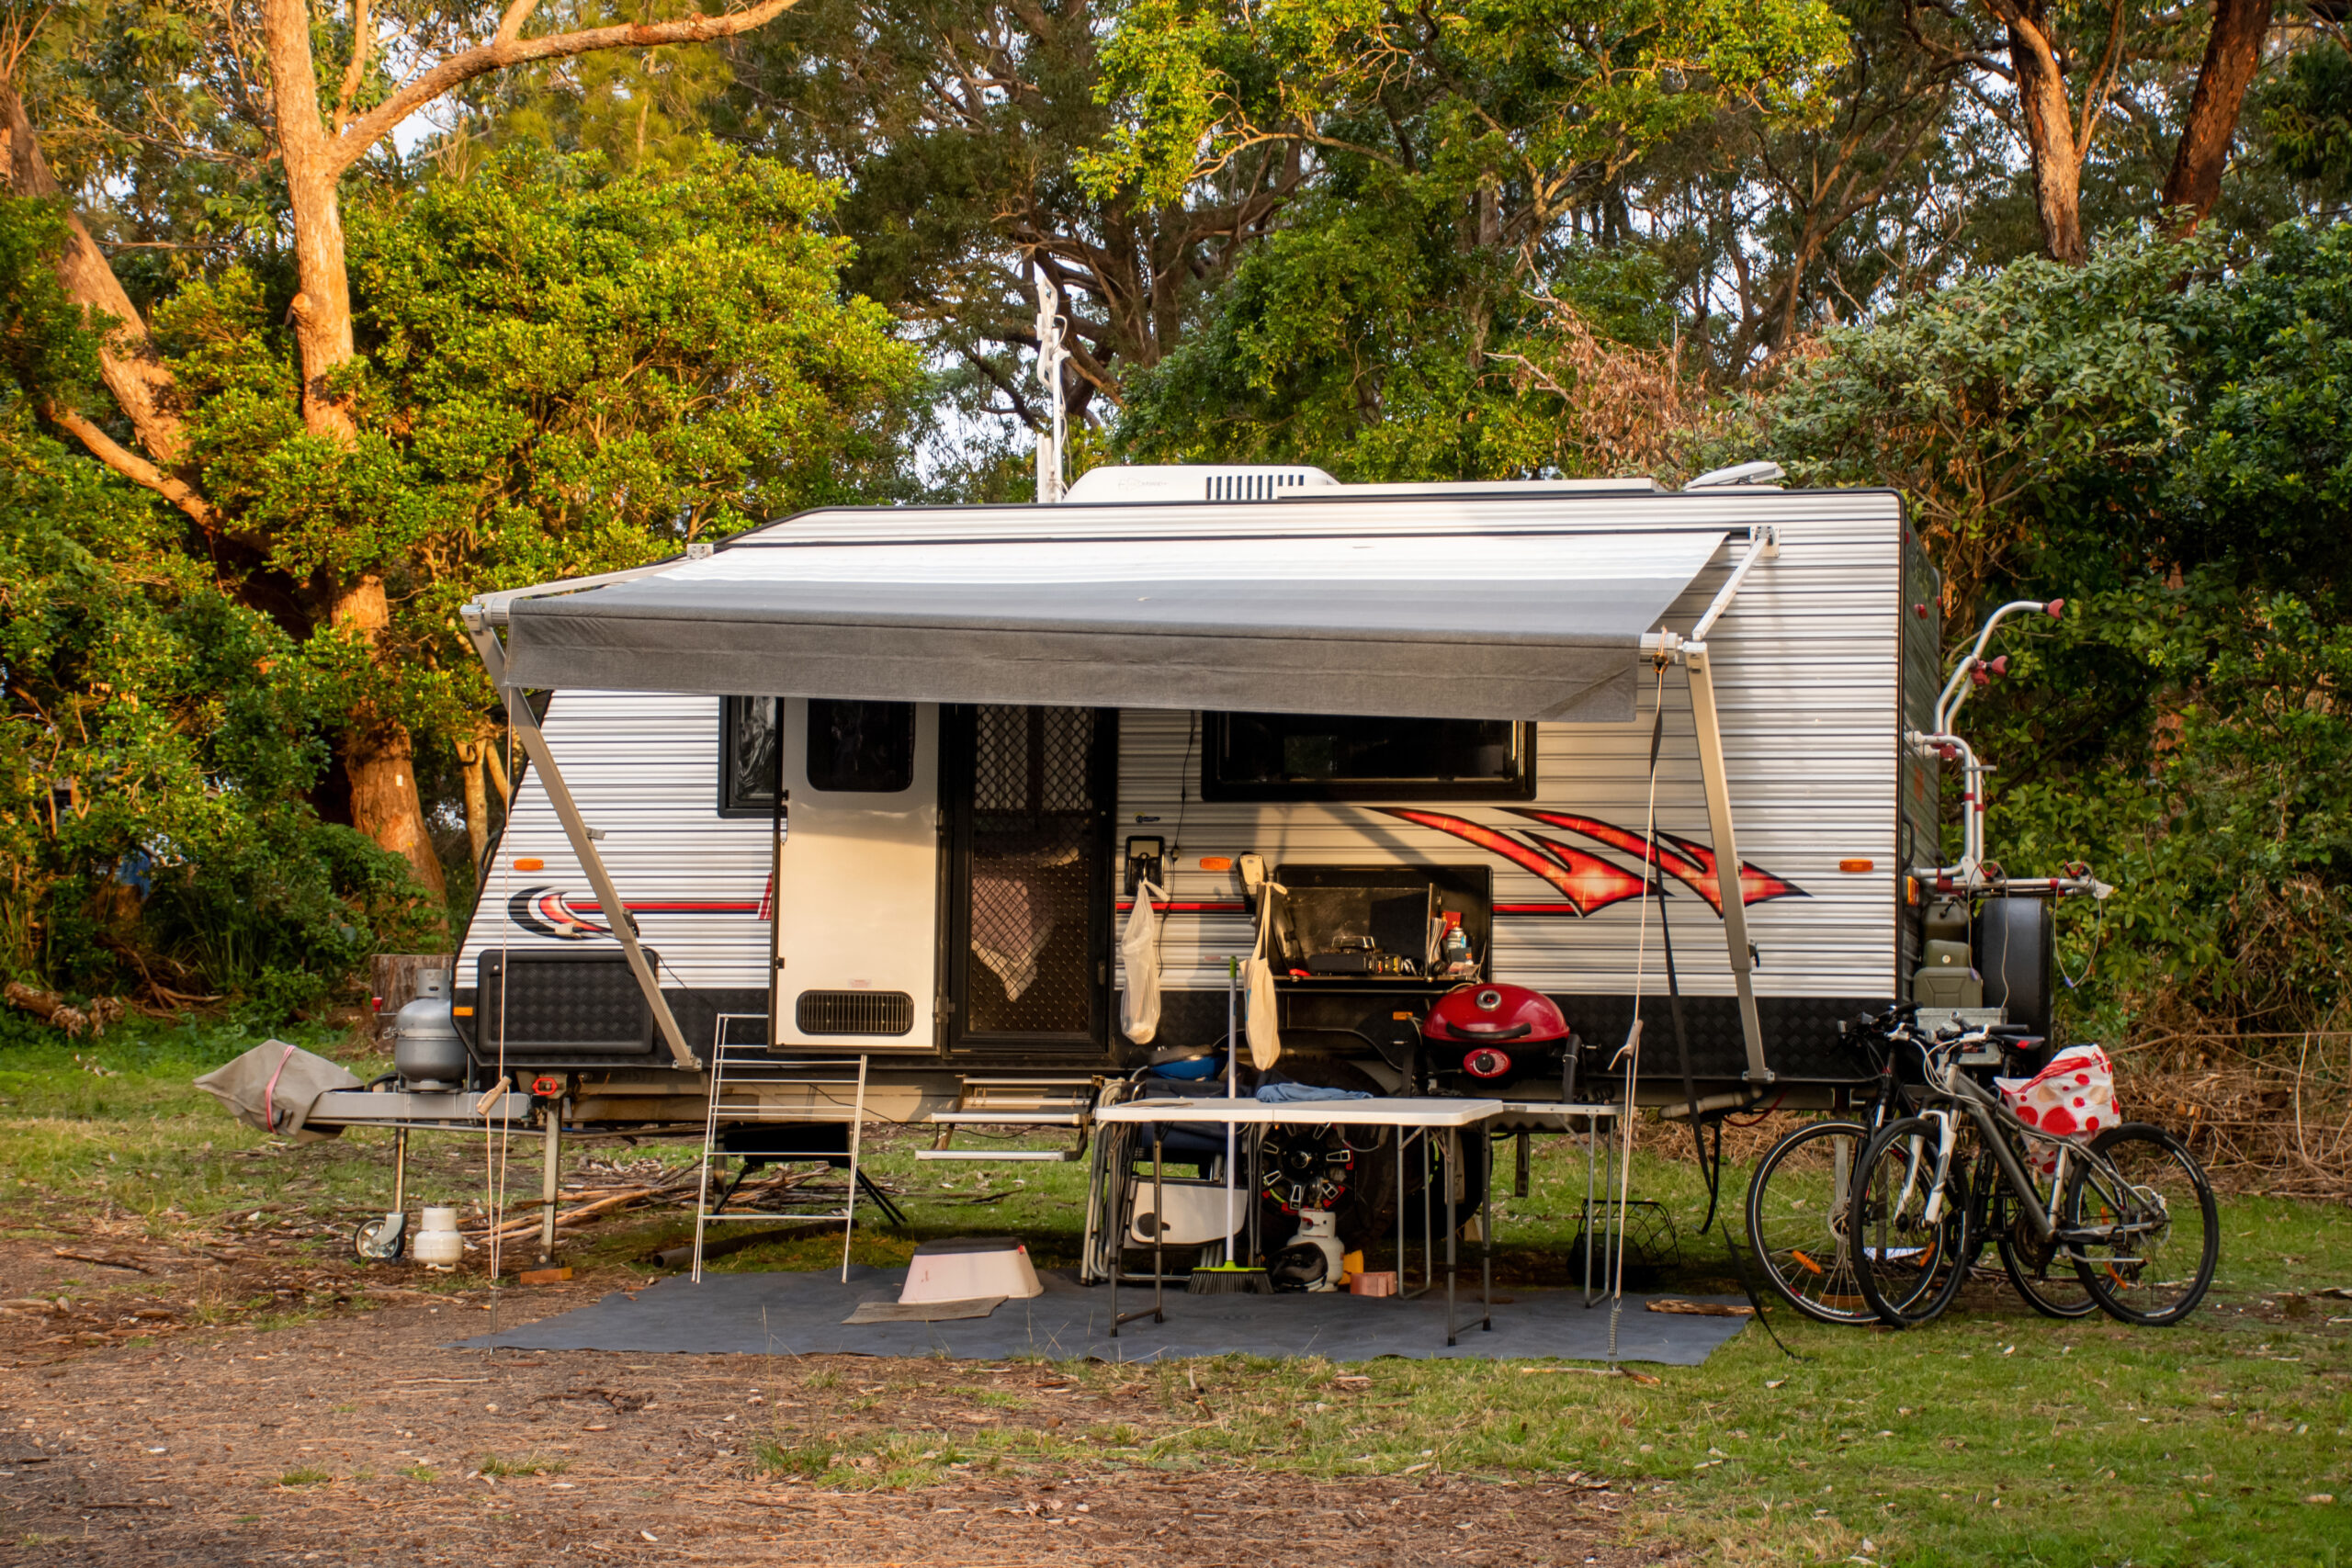 an RV with an RV awning at a campsite - feature image for How To Clean A Stained RV Awning